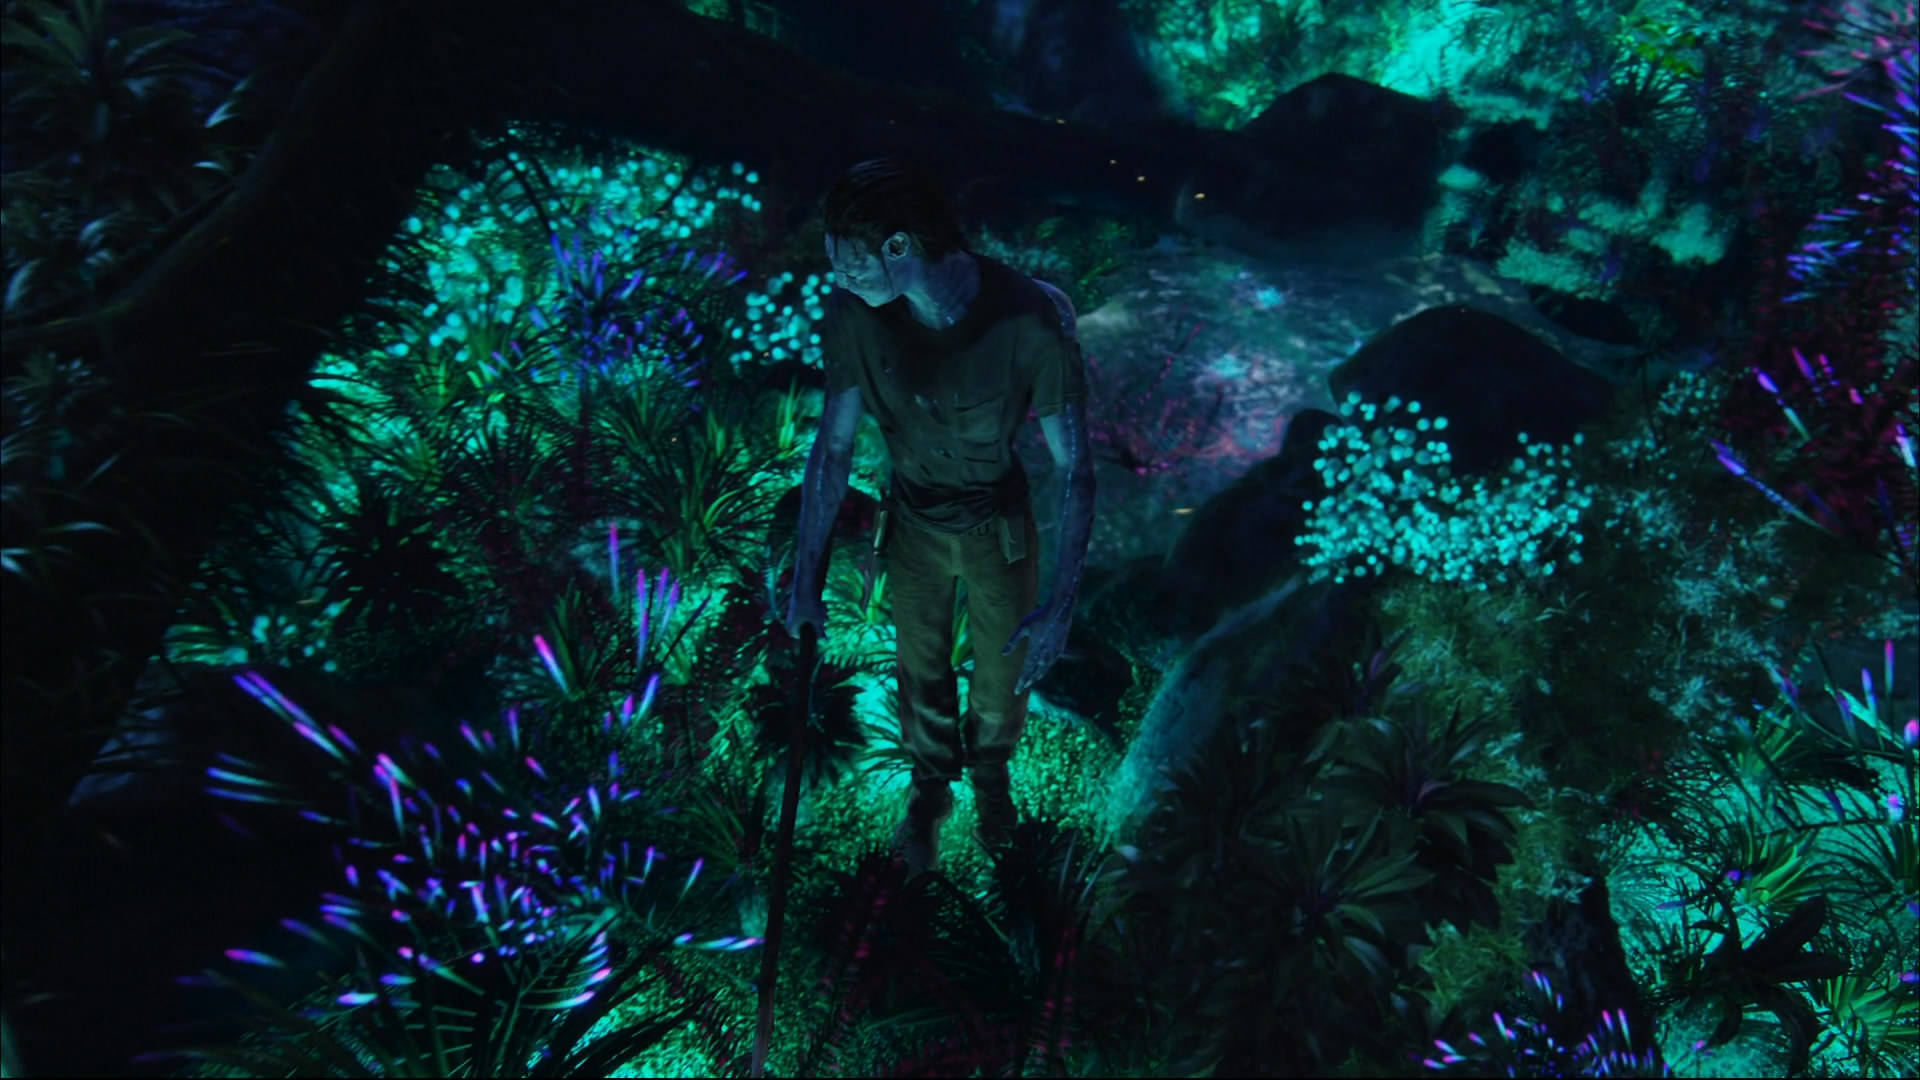 Travel To The Magical World Of Pandora With Avatar. Background